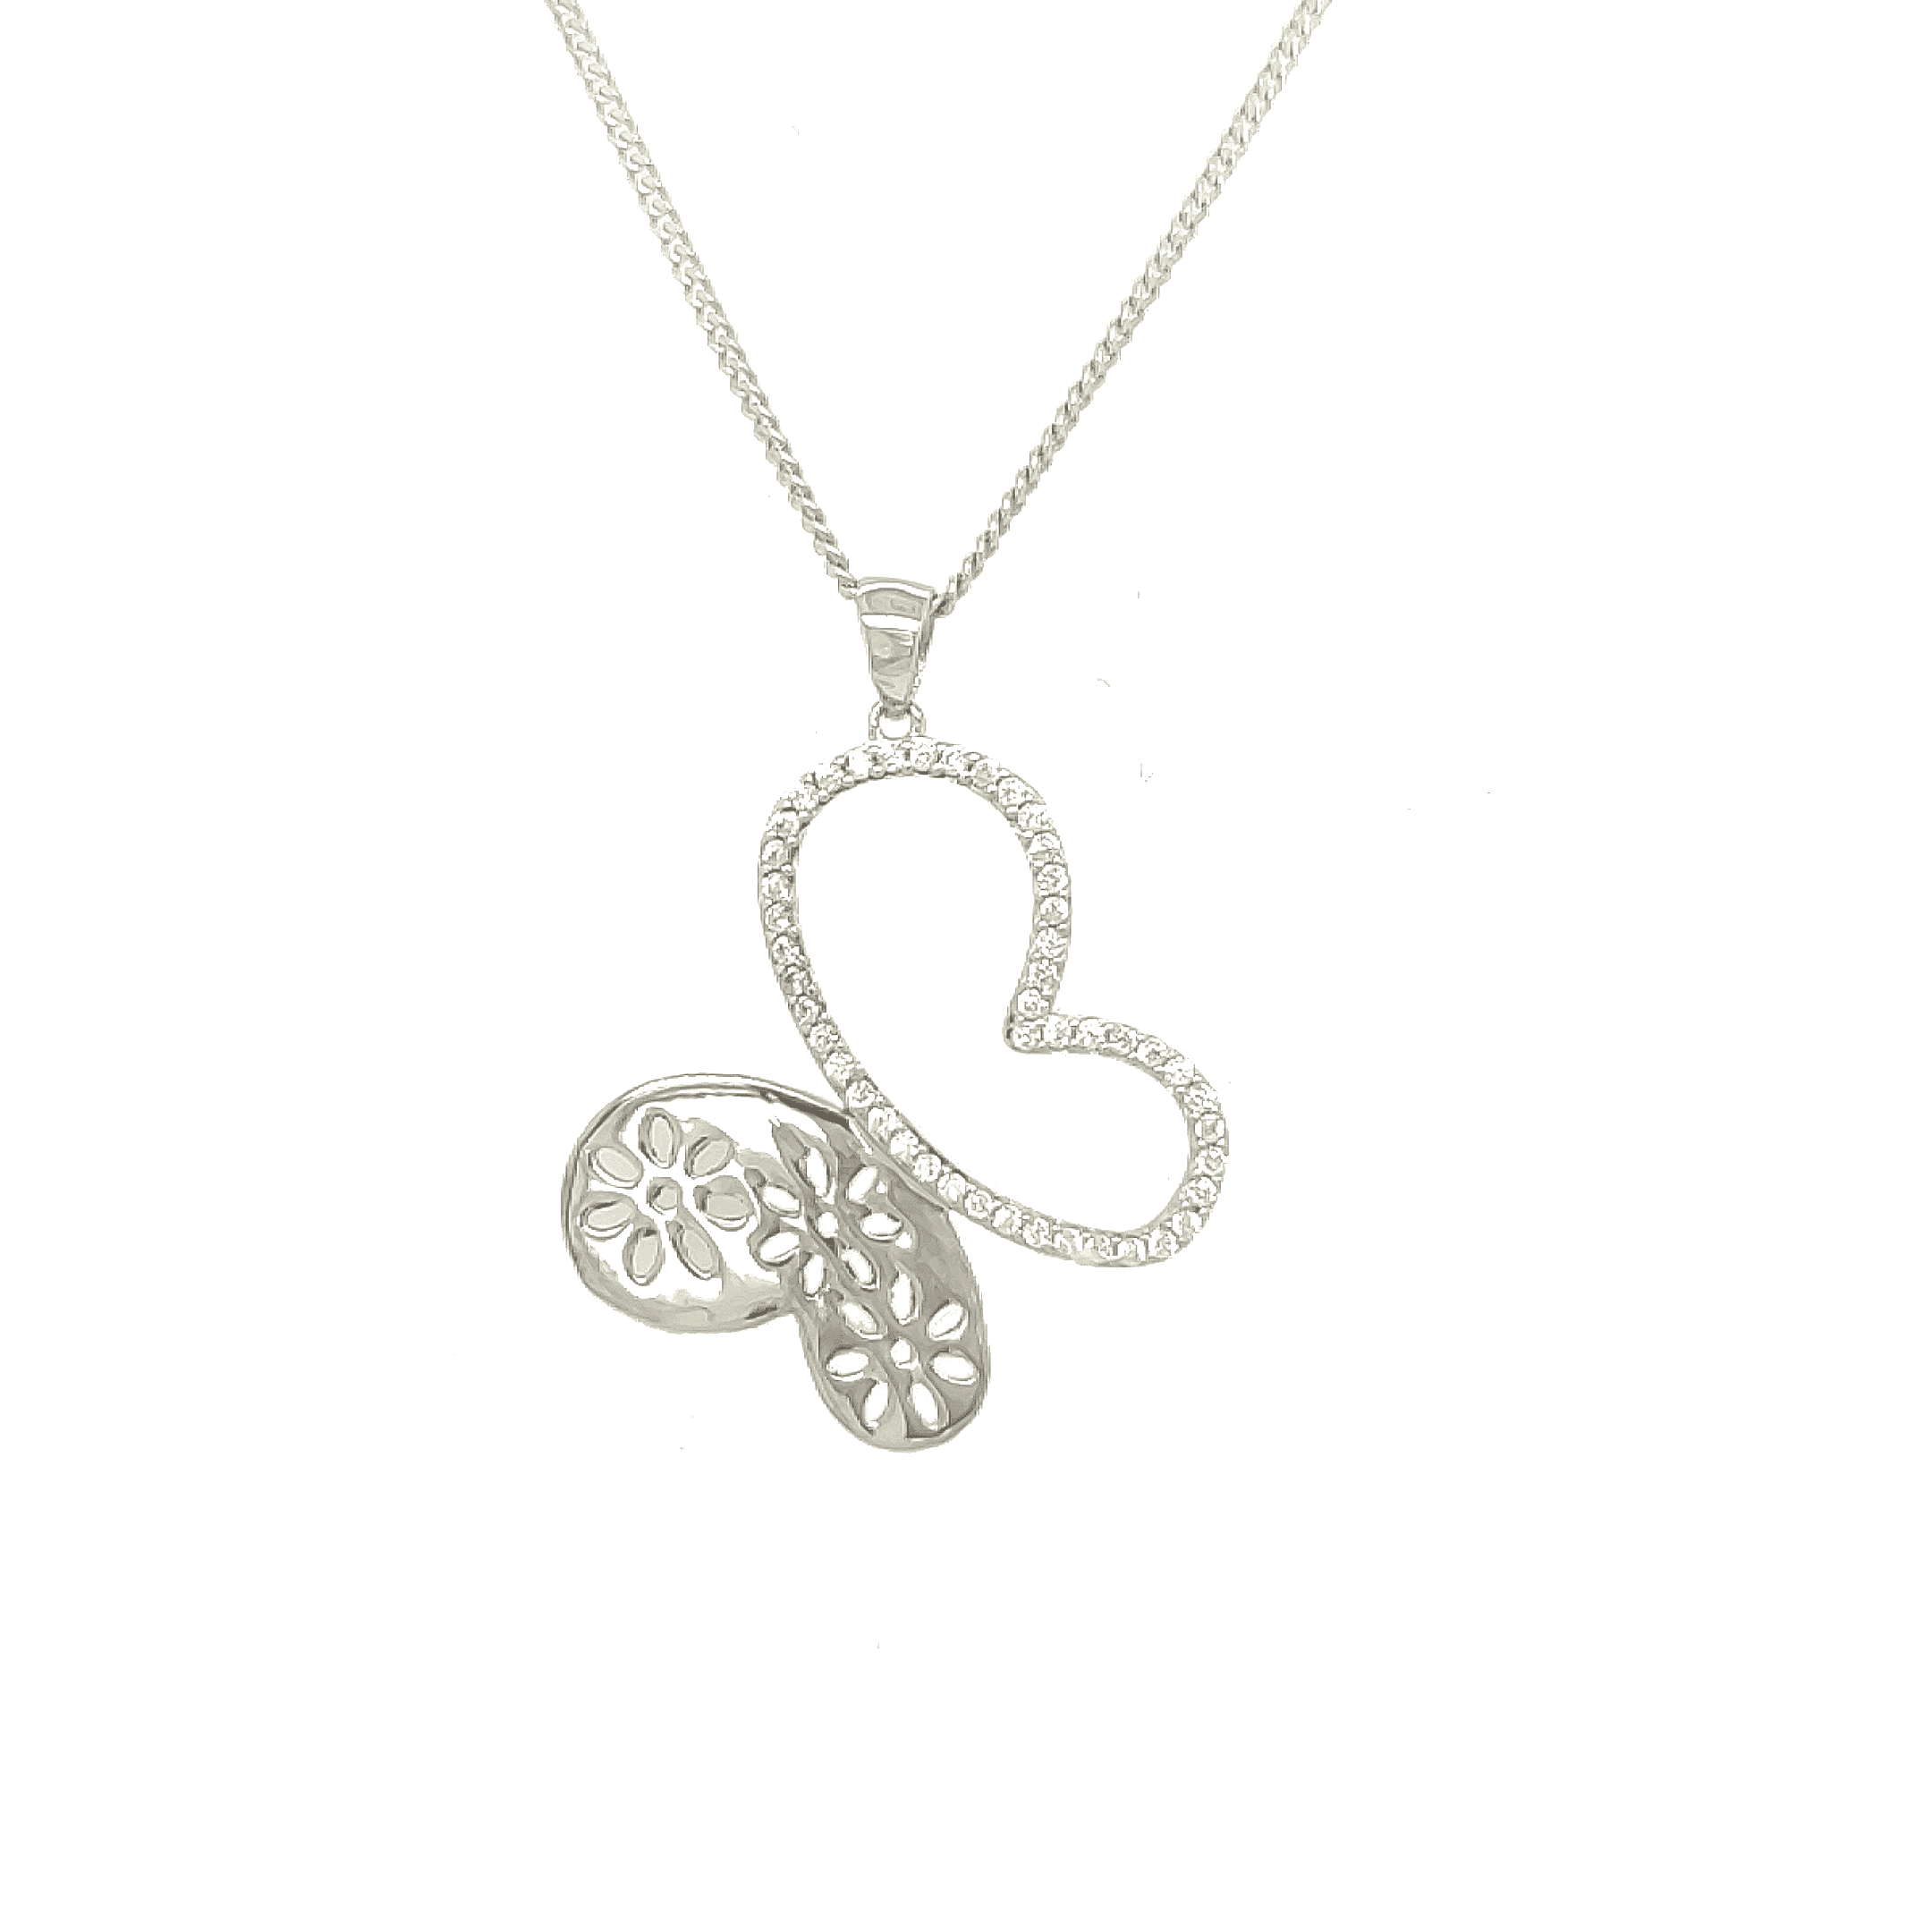 Asfour ButterFly Necklace in 925 Sterling Silver